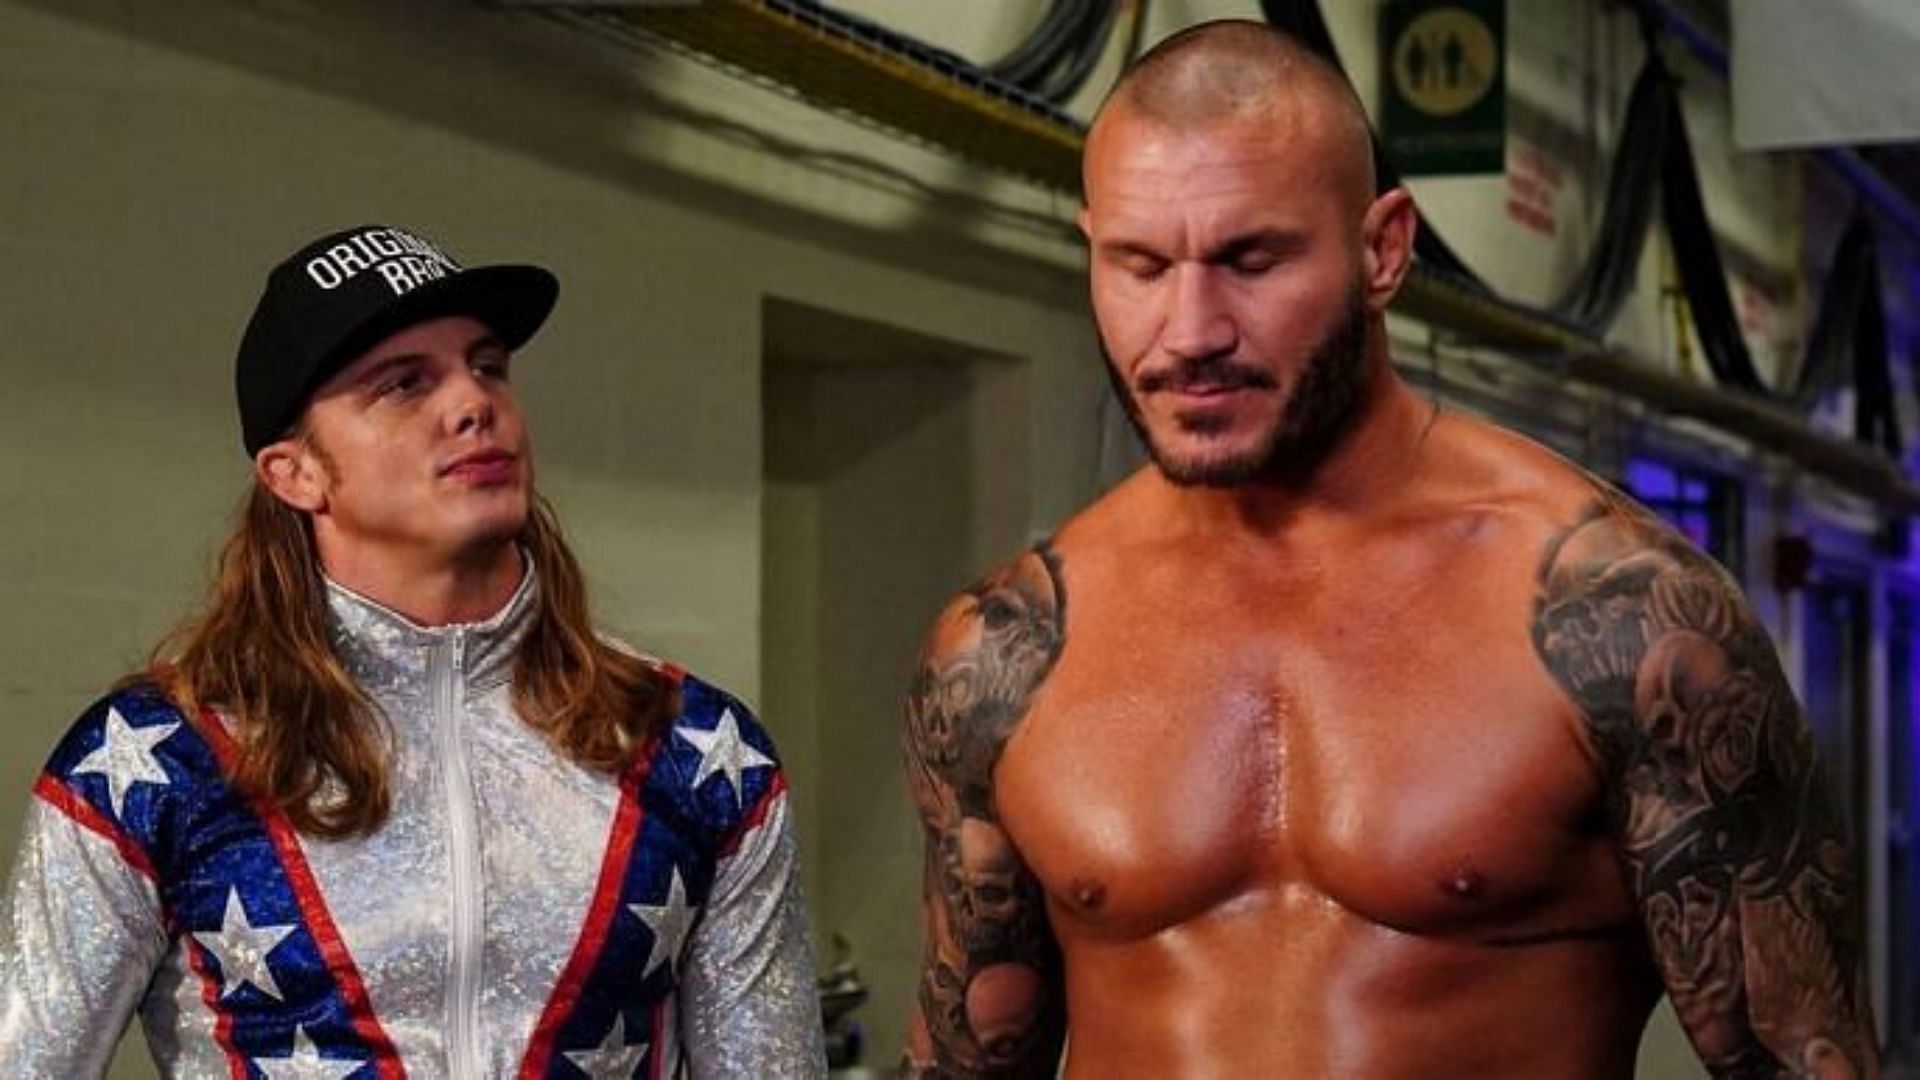 Randy Orton and Matt Riddle for the WWE Championship could happen in the future.